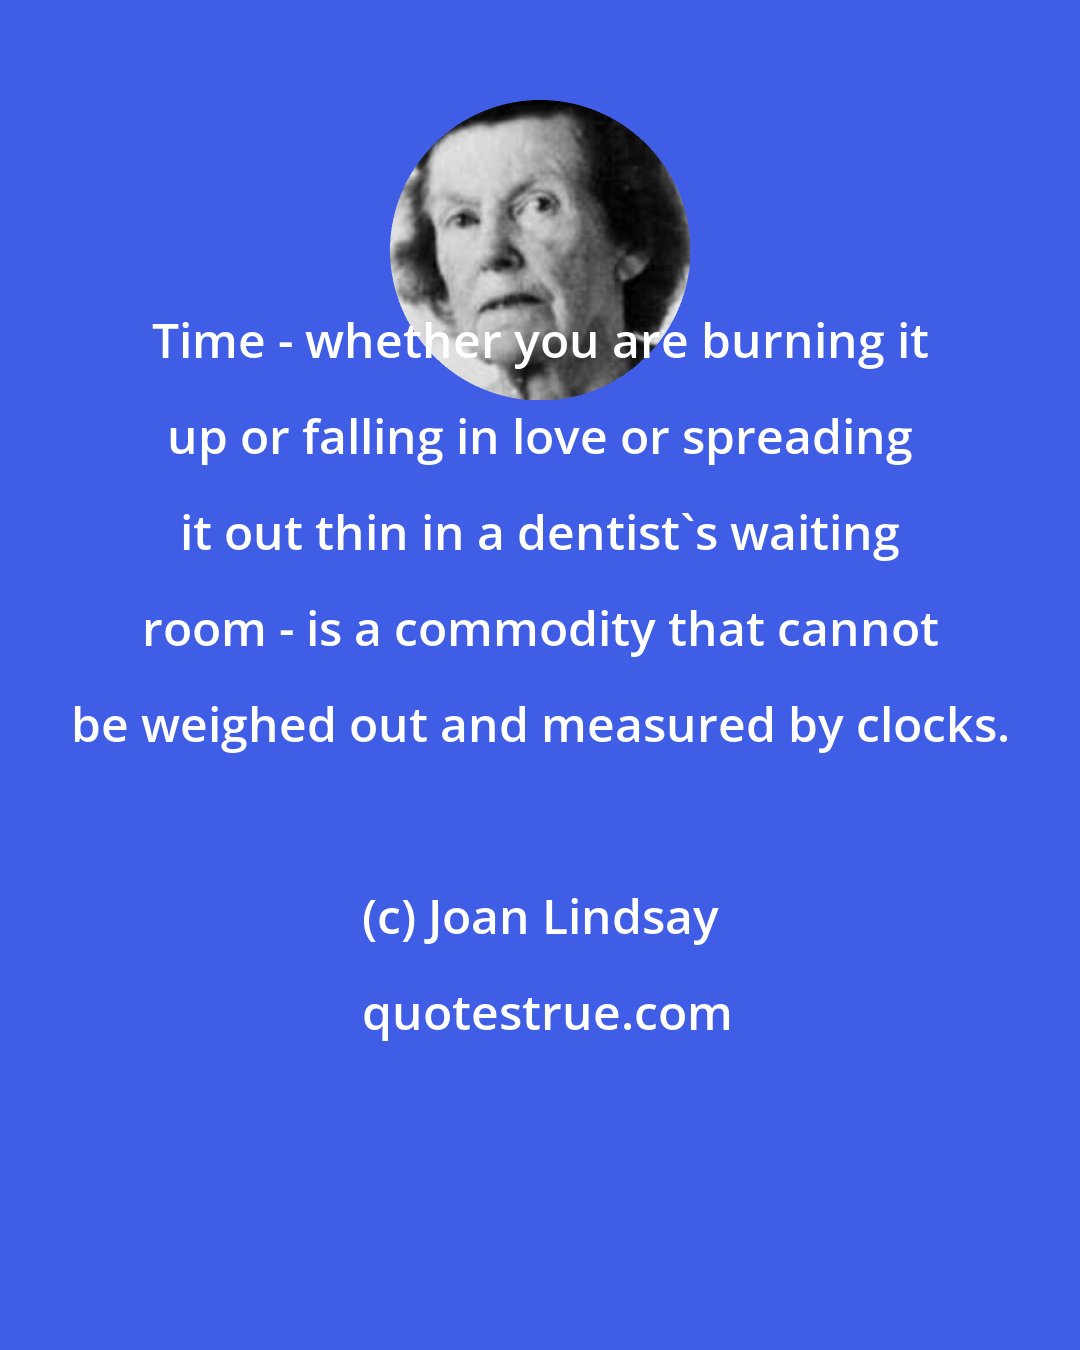 Joan Lindsay: Time - whether you are burning it up or falling in love or spreading it out thin in a dentist's waiting room - is a commodity that cannot be weighed out and measured by clocks.